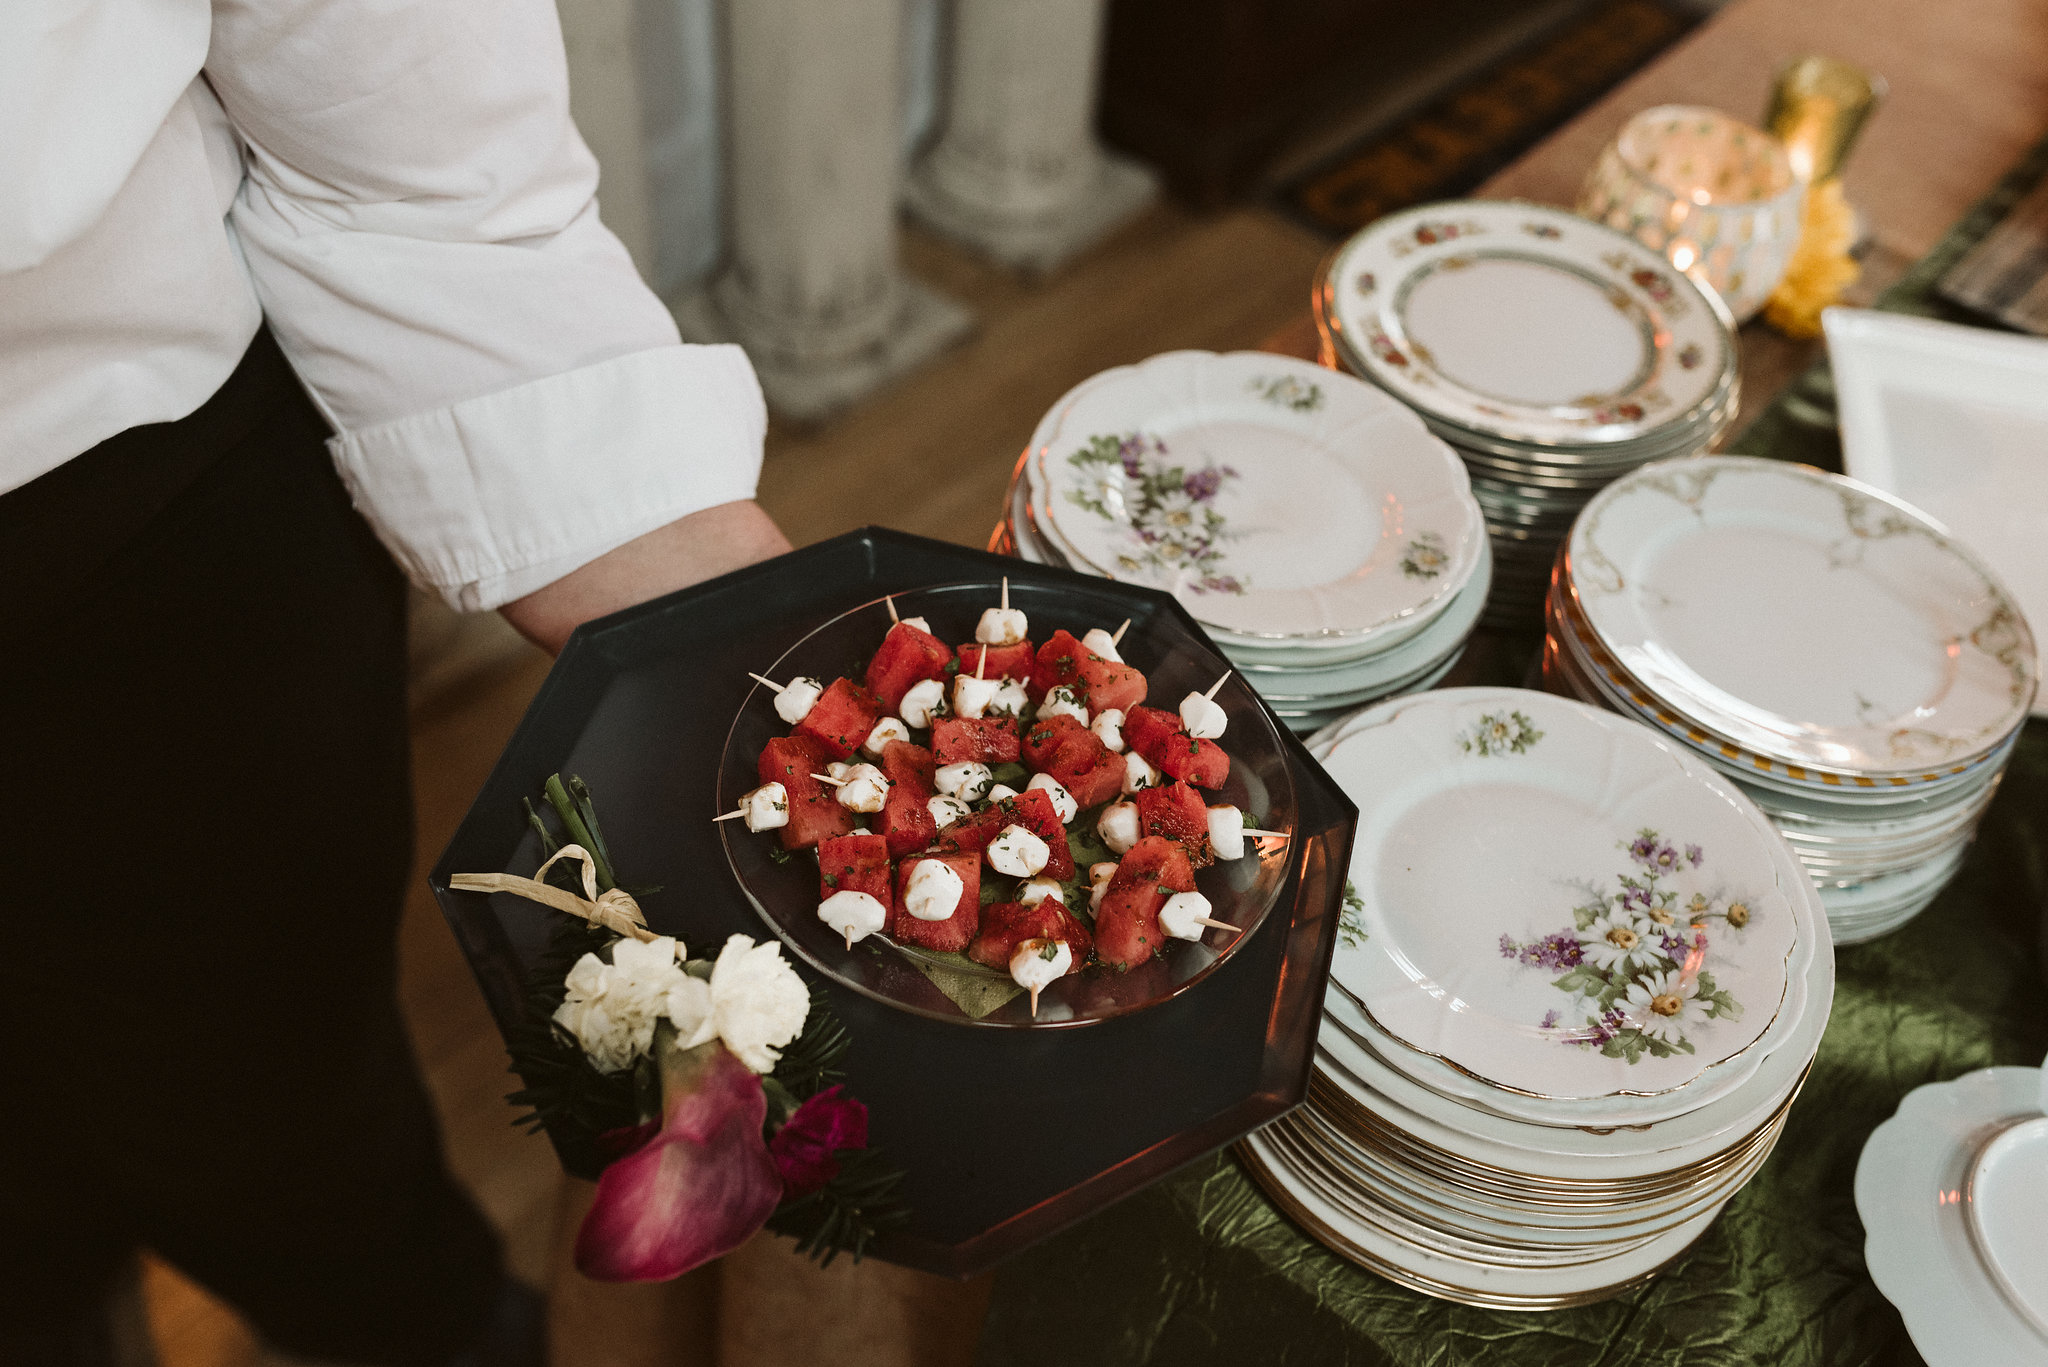  Baltimore, Maryland Wedding Photographer, Hampden, Eco-Friendly, Green, The Elm, Simple and Classic, Vintage, Fresh Appetizers at Reception, Peter Halstad 